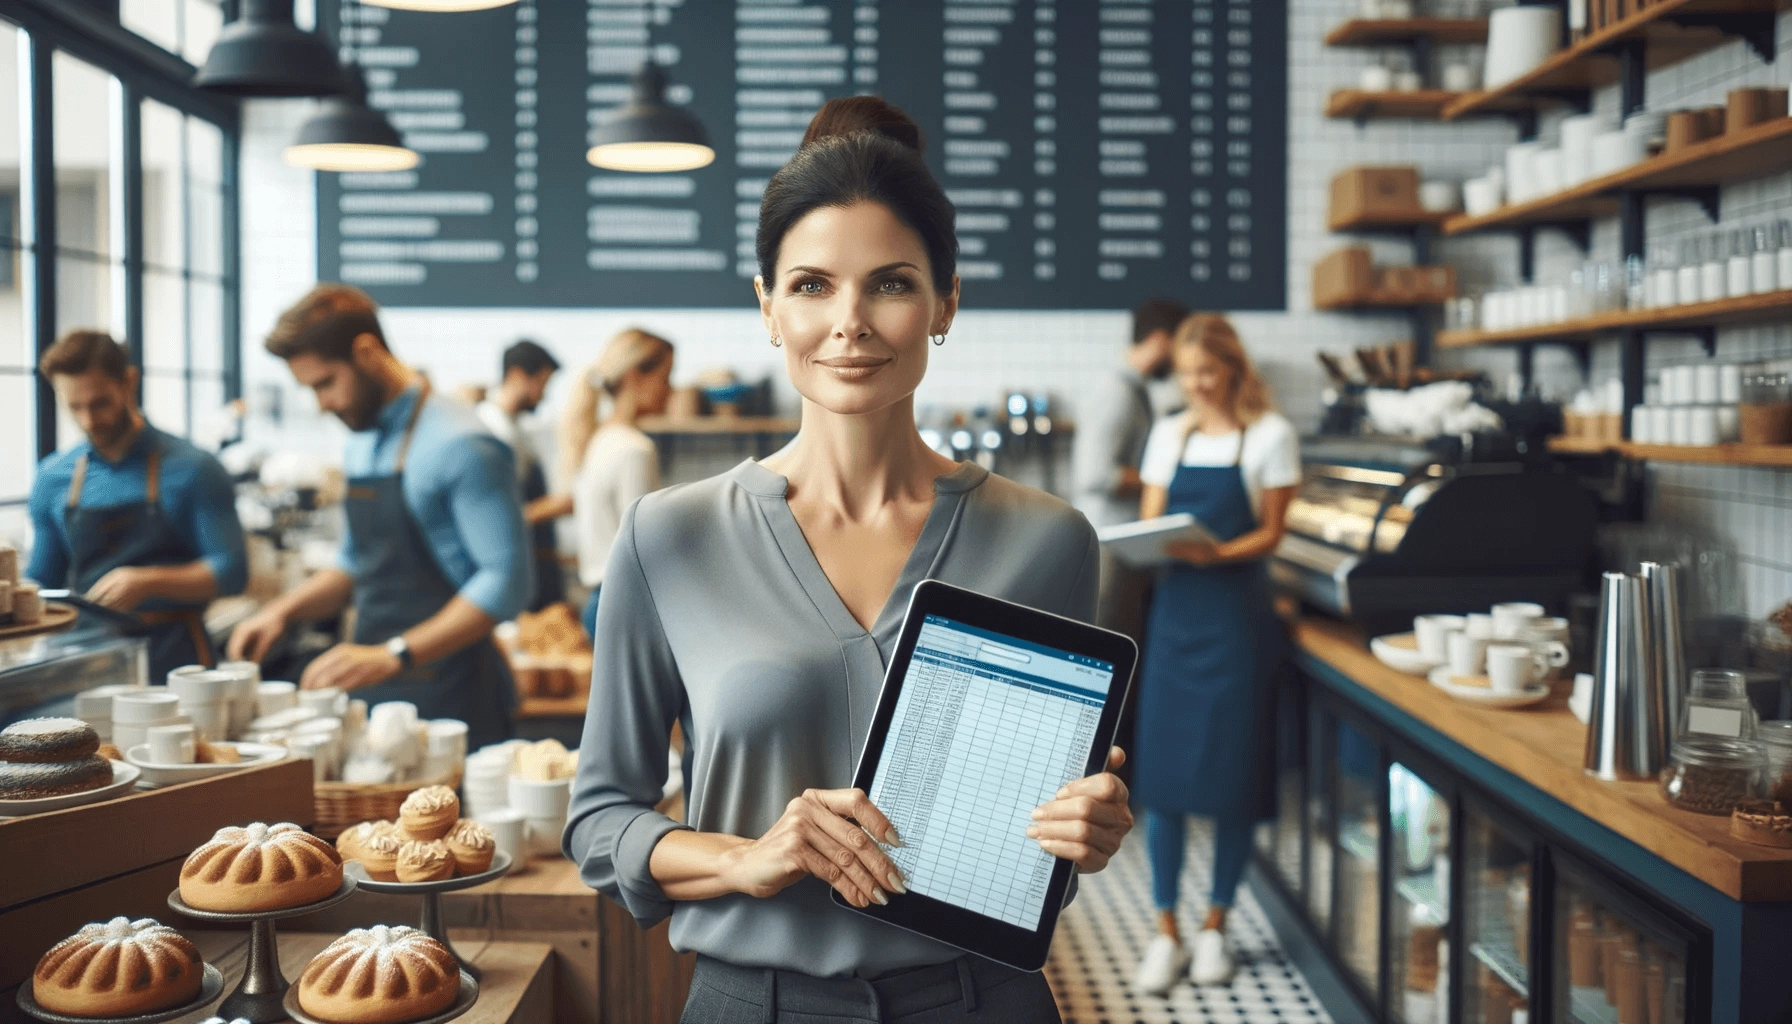 Smiling business owner holding a tablet in a bakery with employees and customers behind